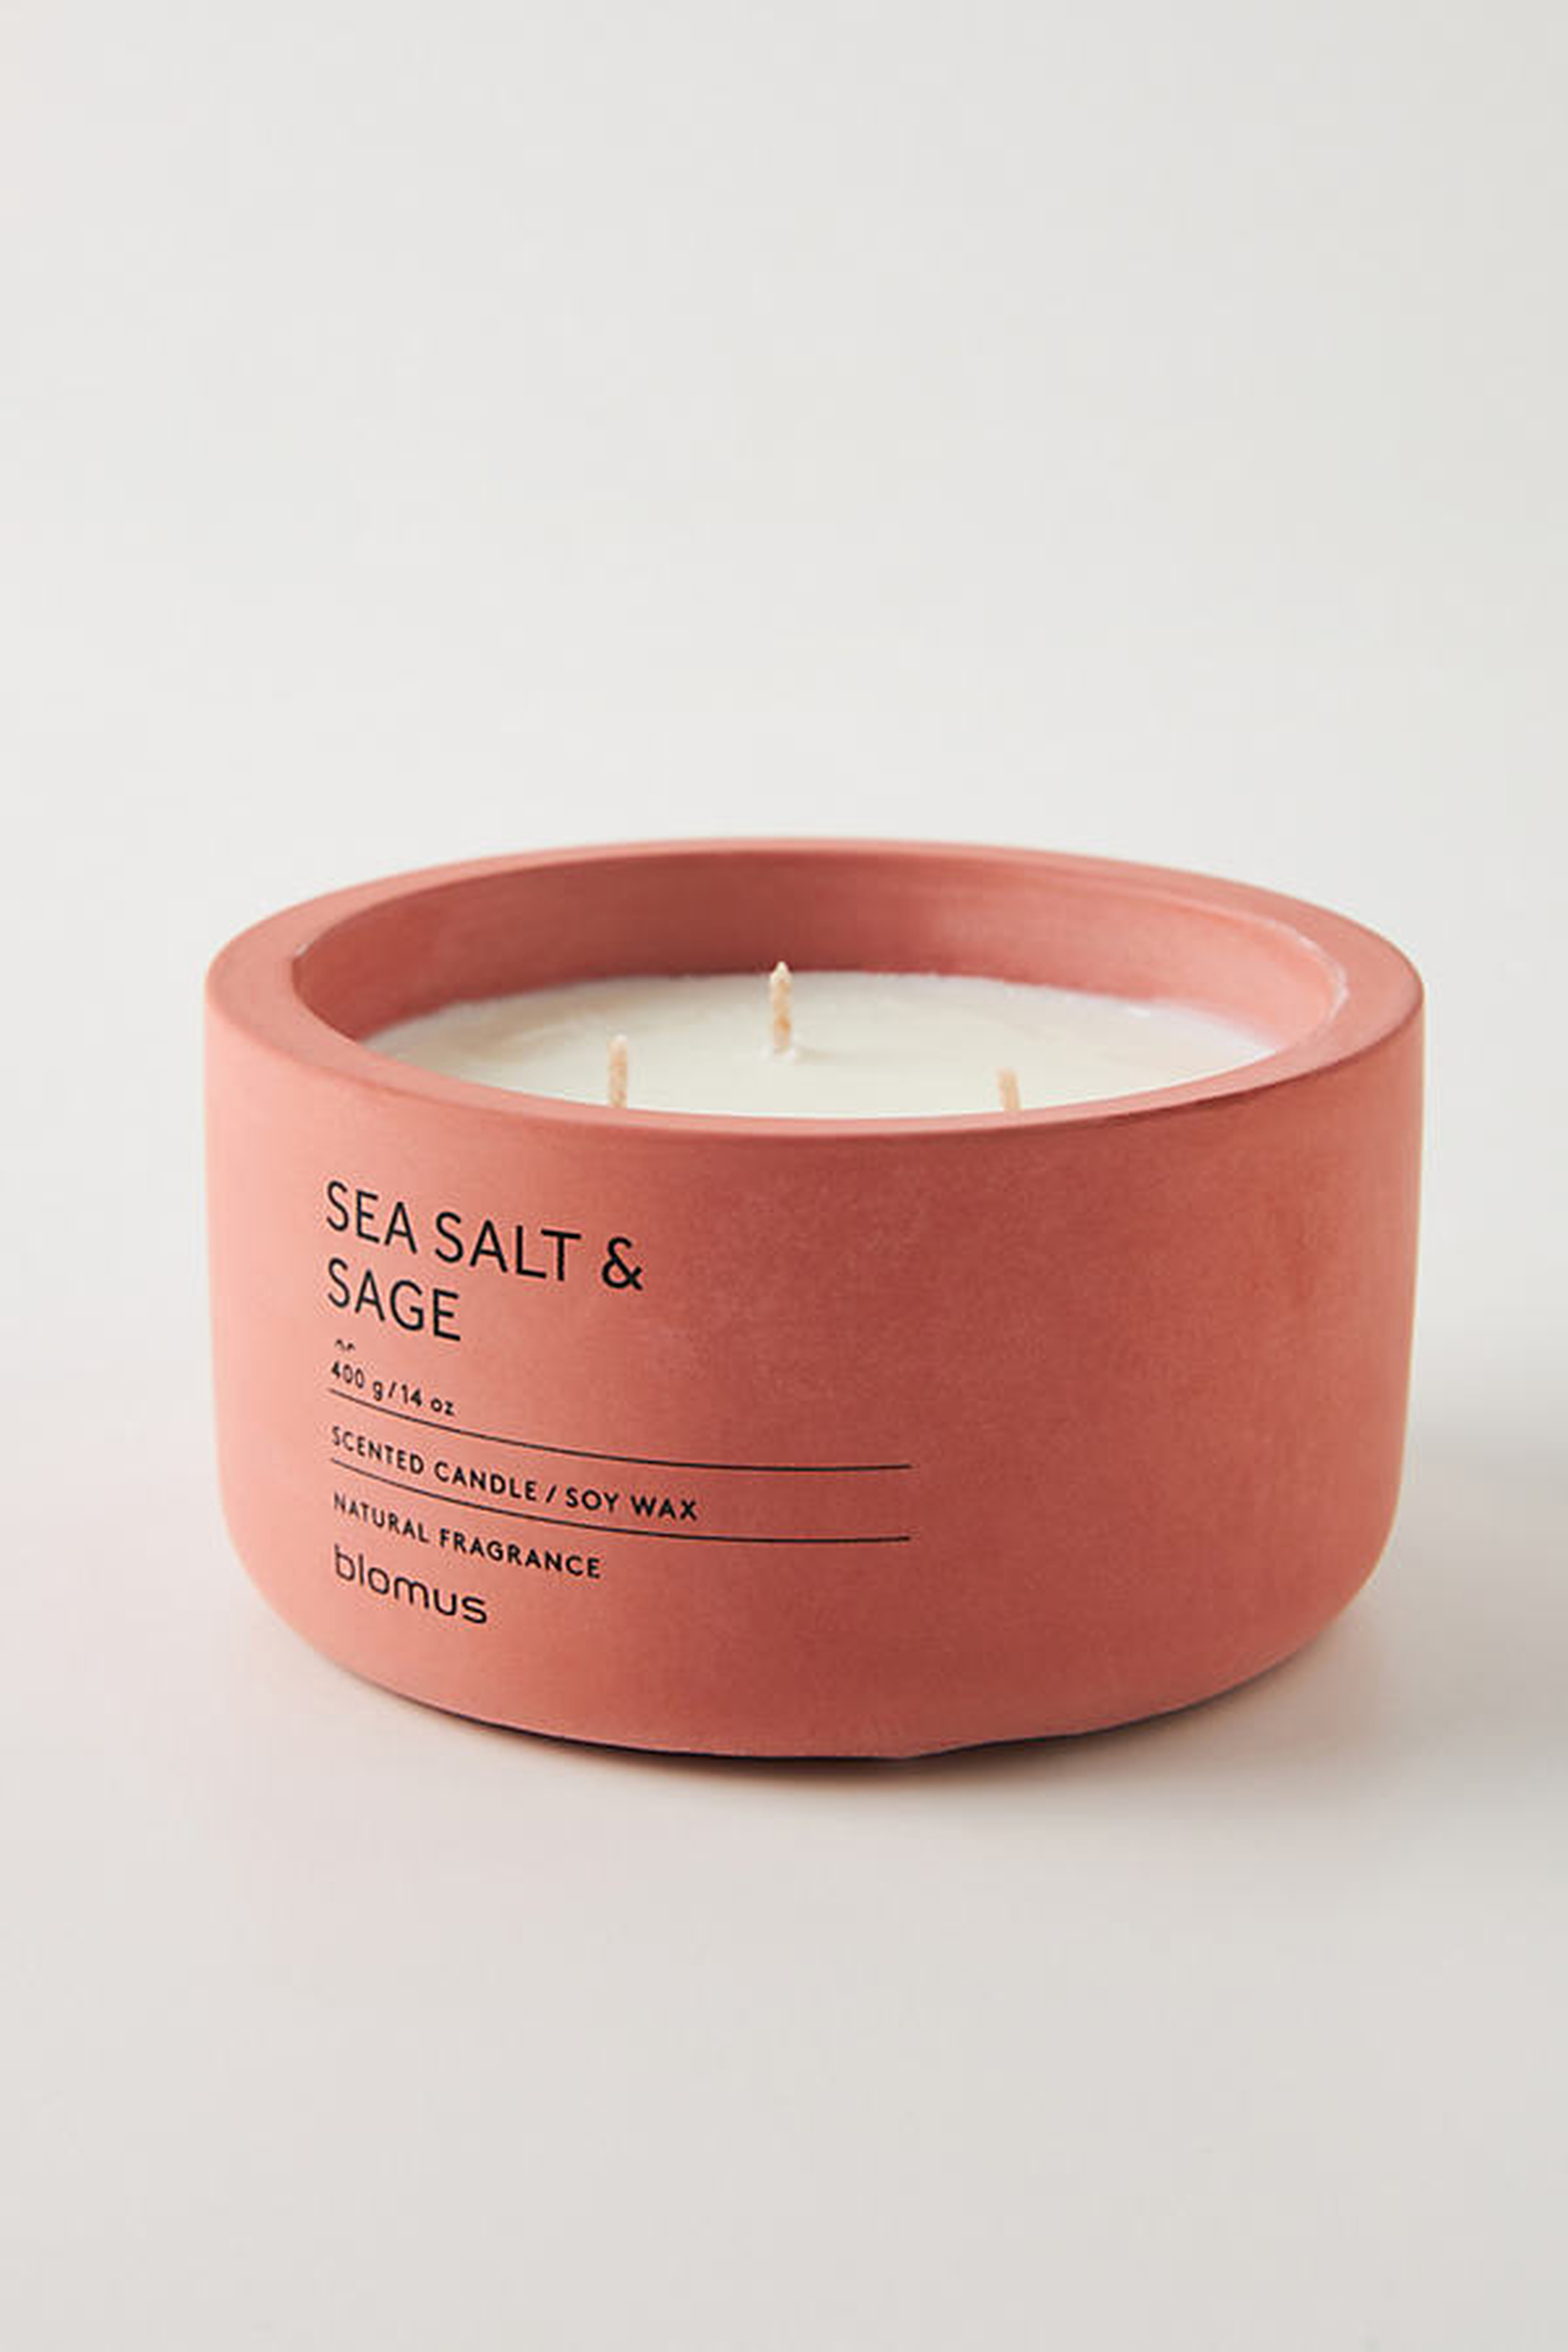 Concrete Candle By Anthropologie in Orange Size L - Anthropologie